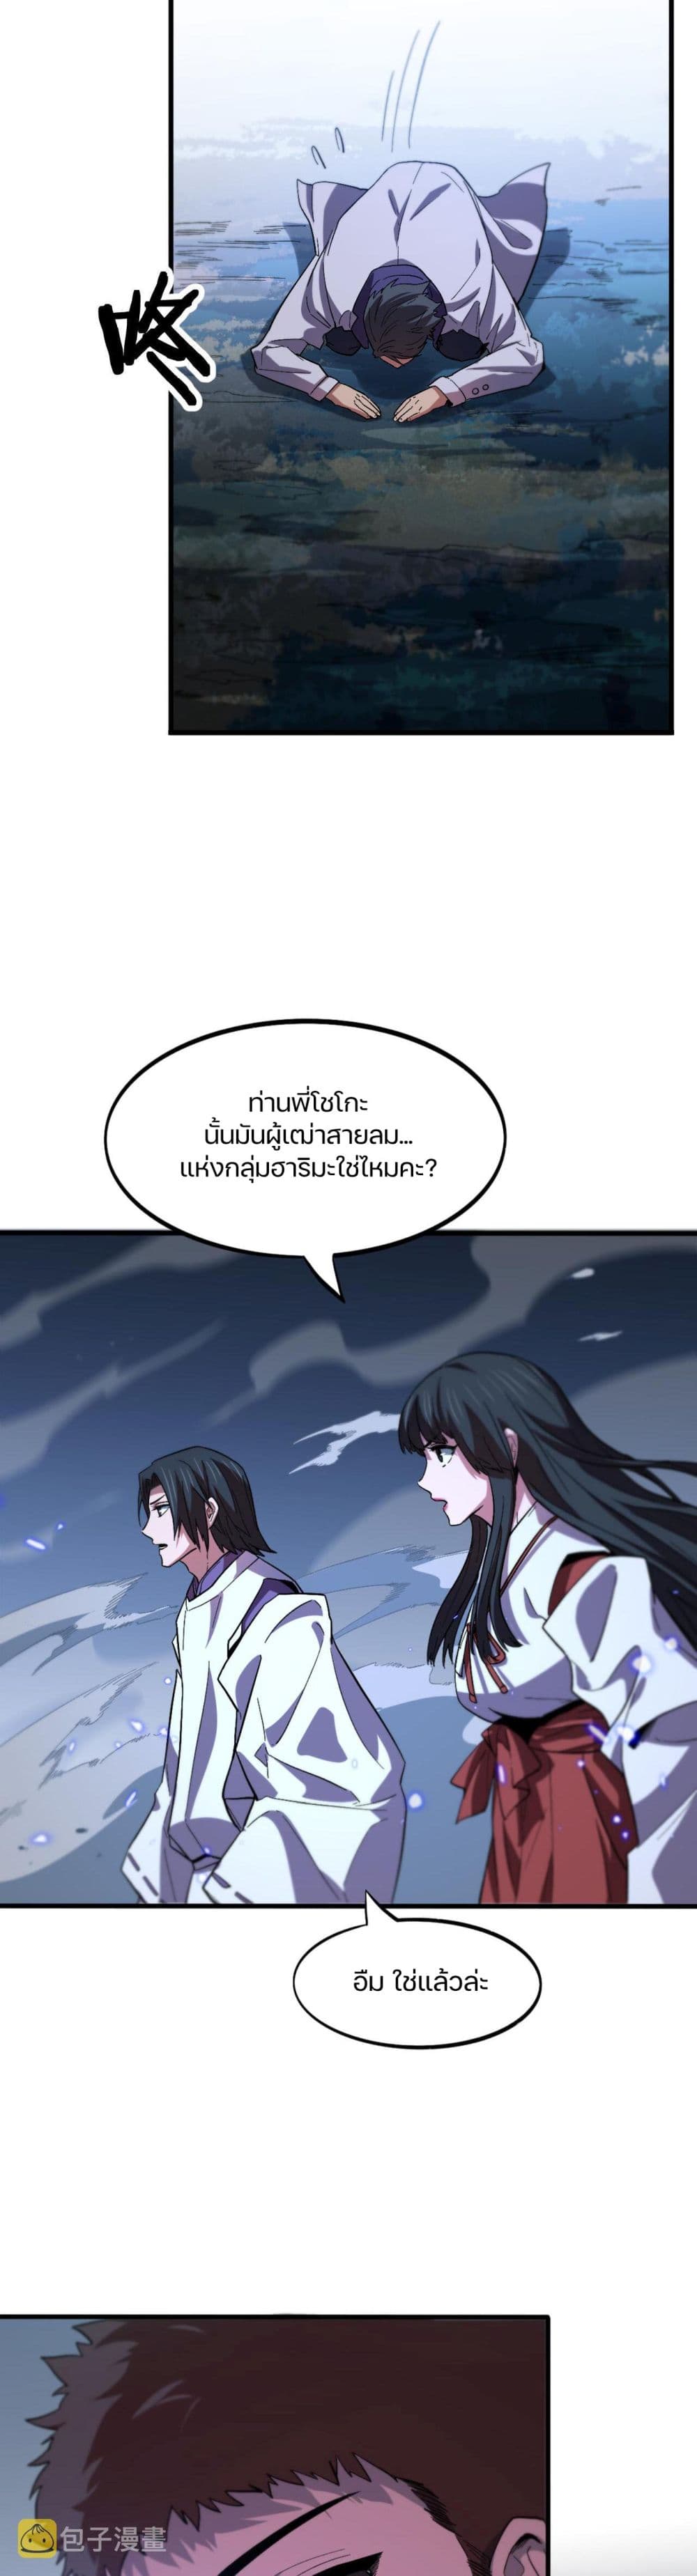 The Grand Master came down from the Mountain 52-อัปเกรดการต่อสู้